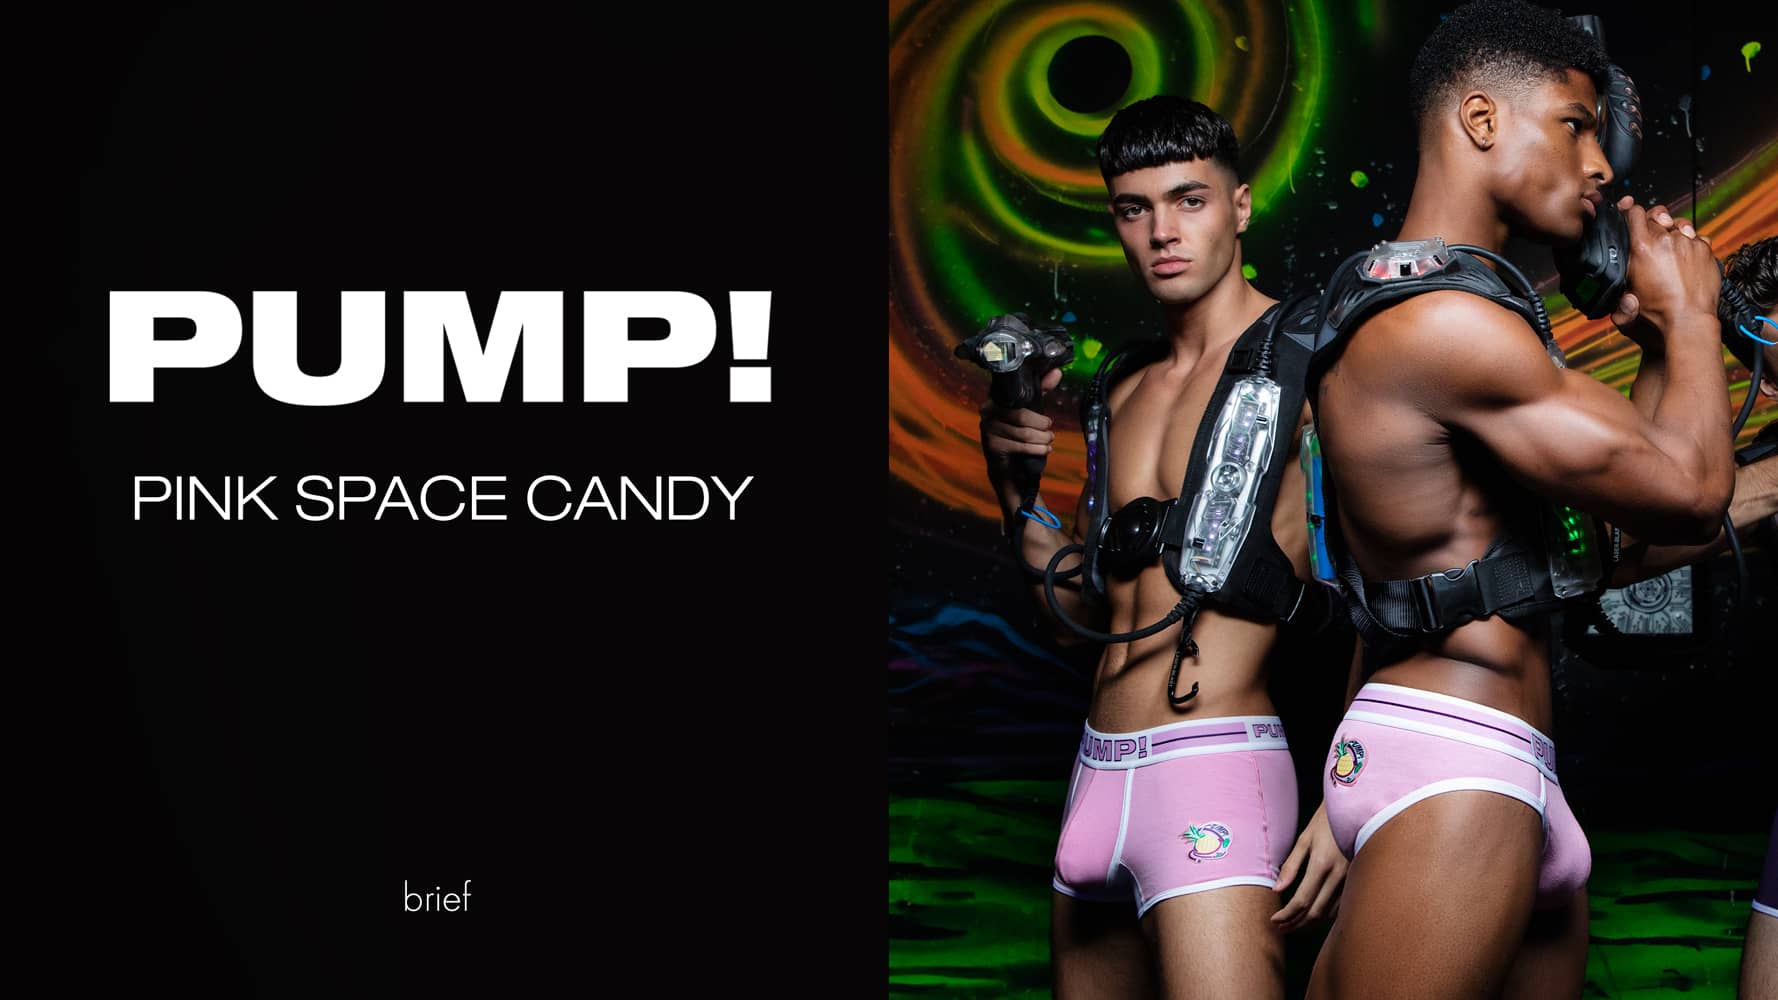 Brief - Pink Space Candy